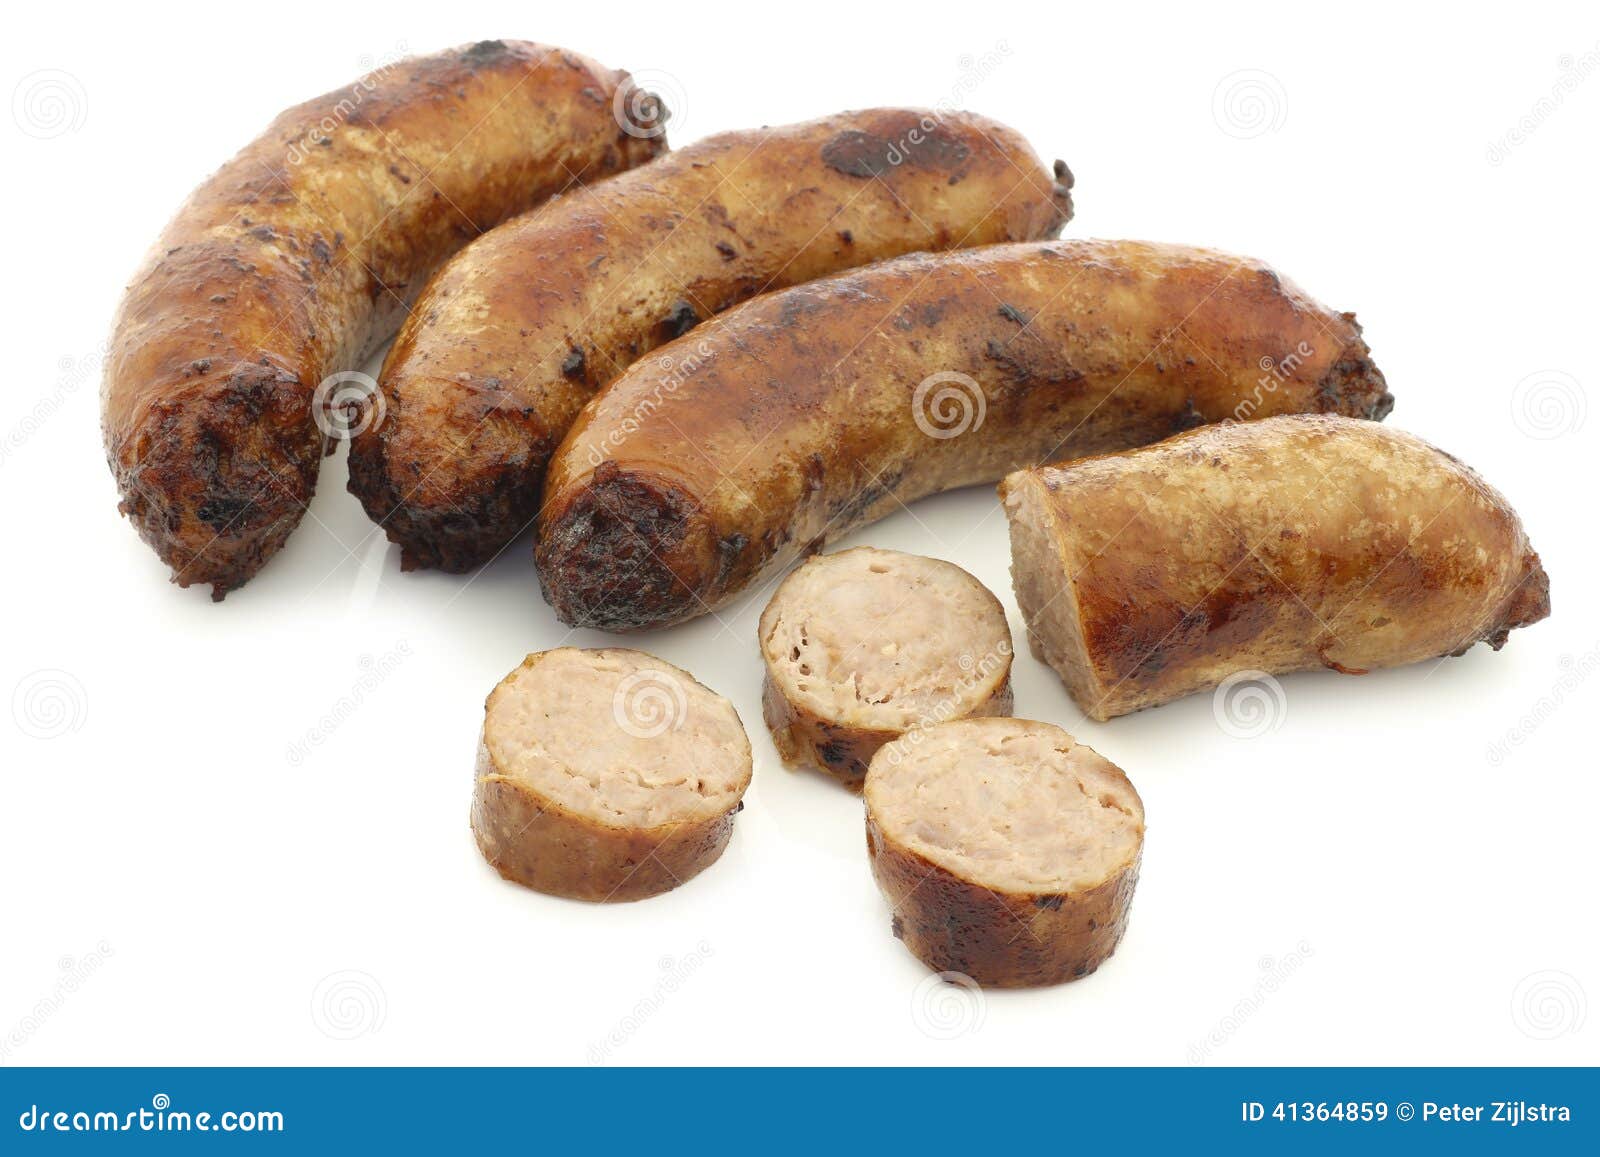 traditional sausages called bratwurst